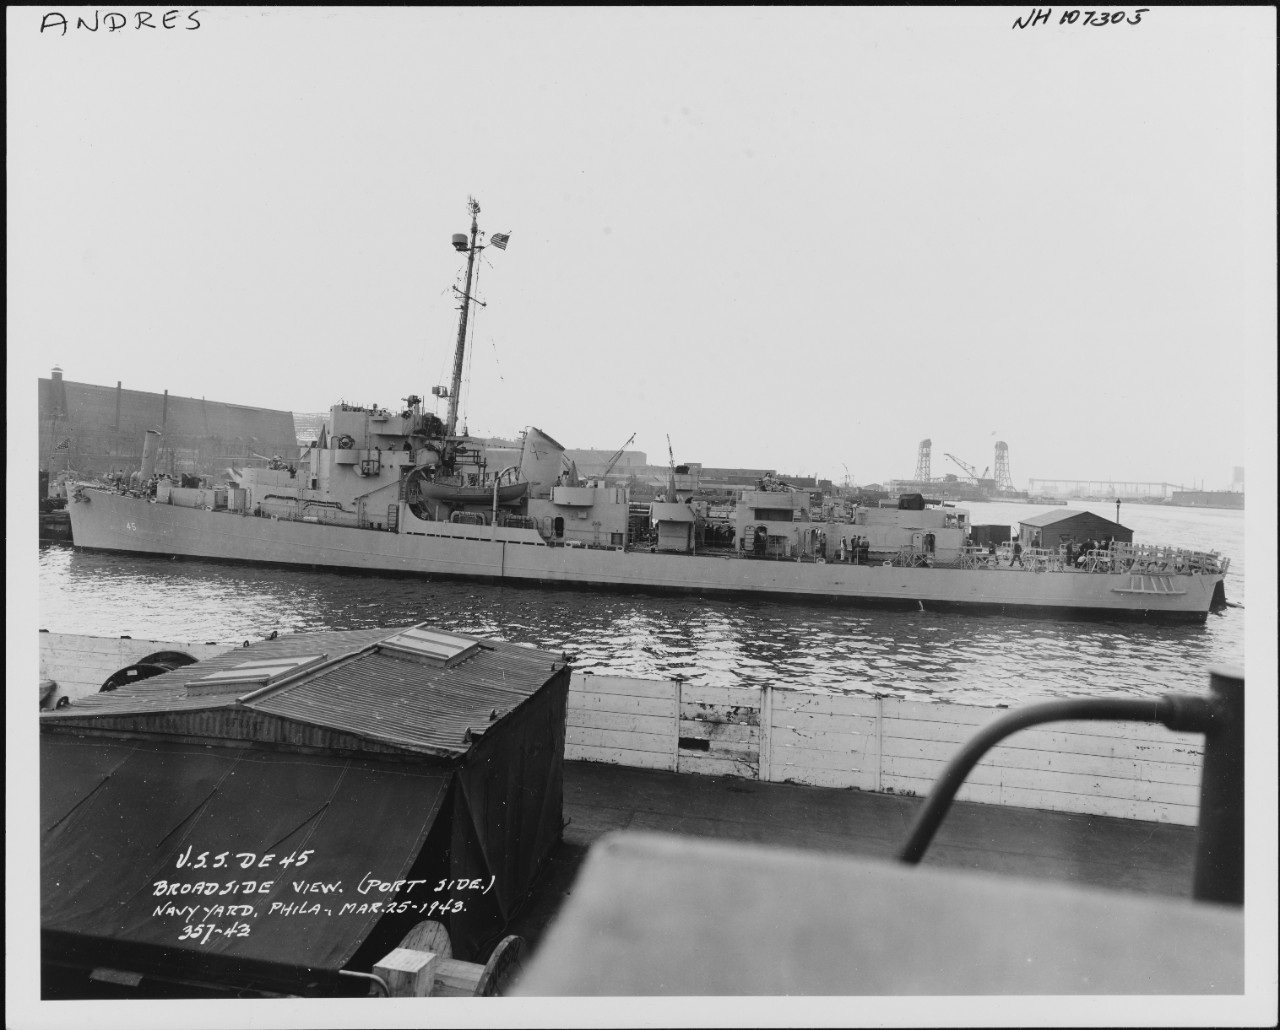 Photo #: NH 107305  USS Andres